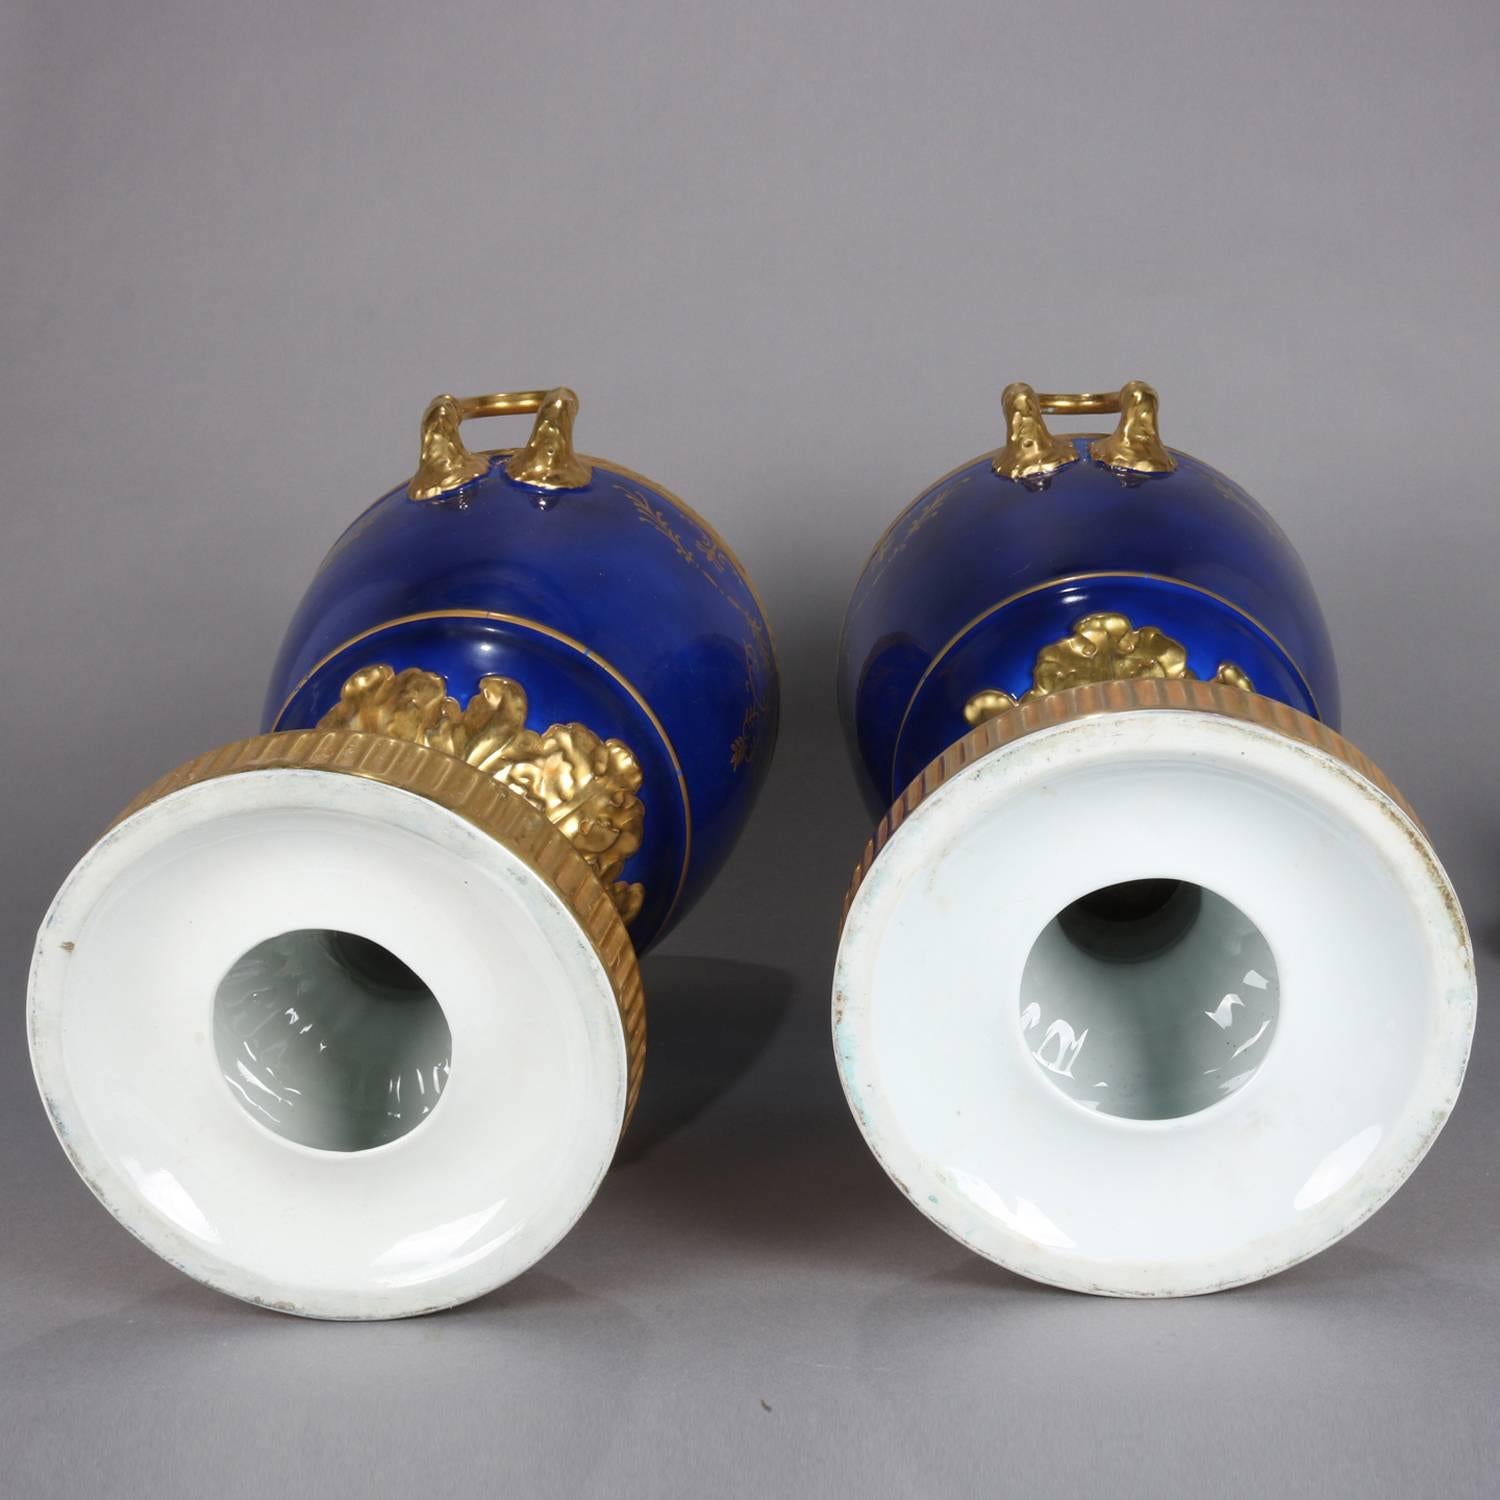 Monumental French Sevres School Hand-Painted Cobalt and Gilt Porcelain Urns 4